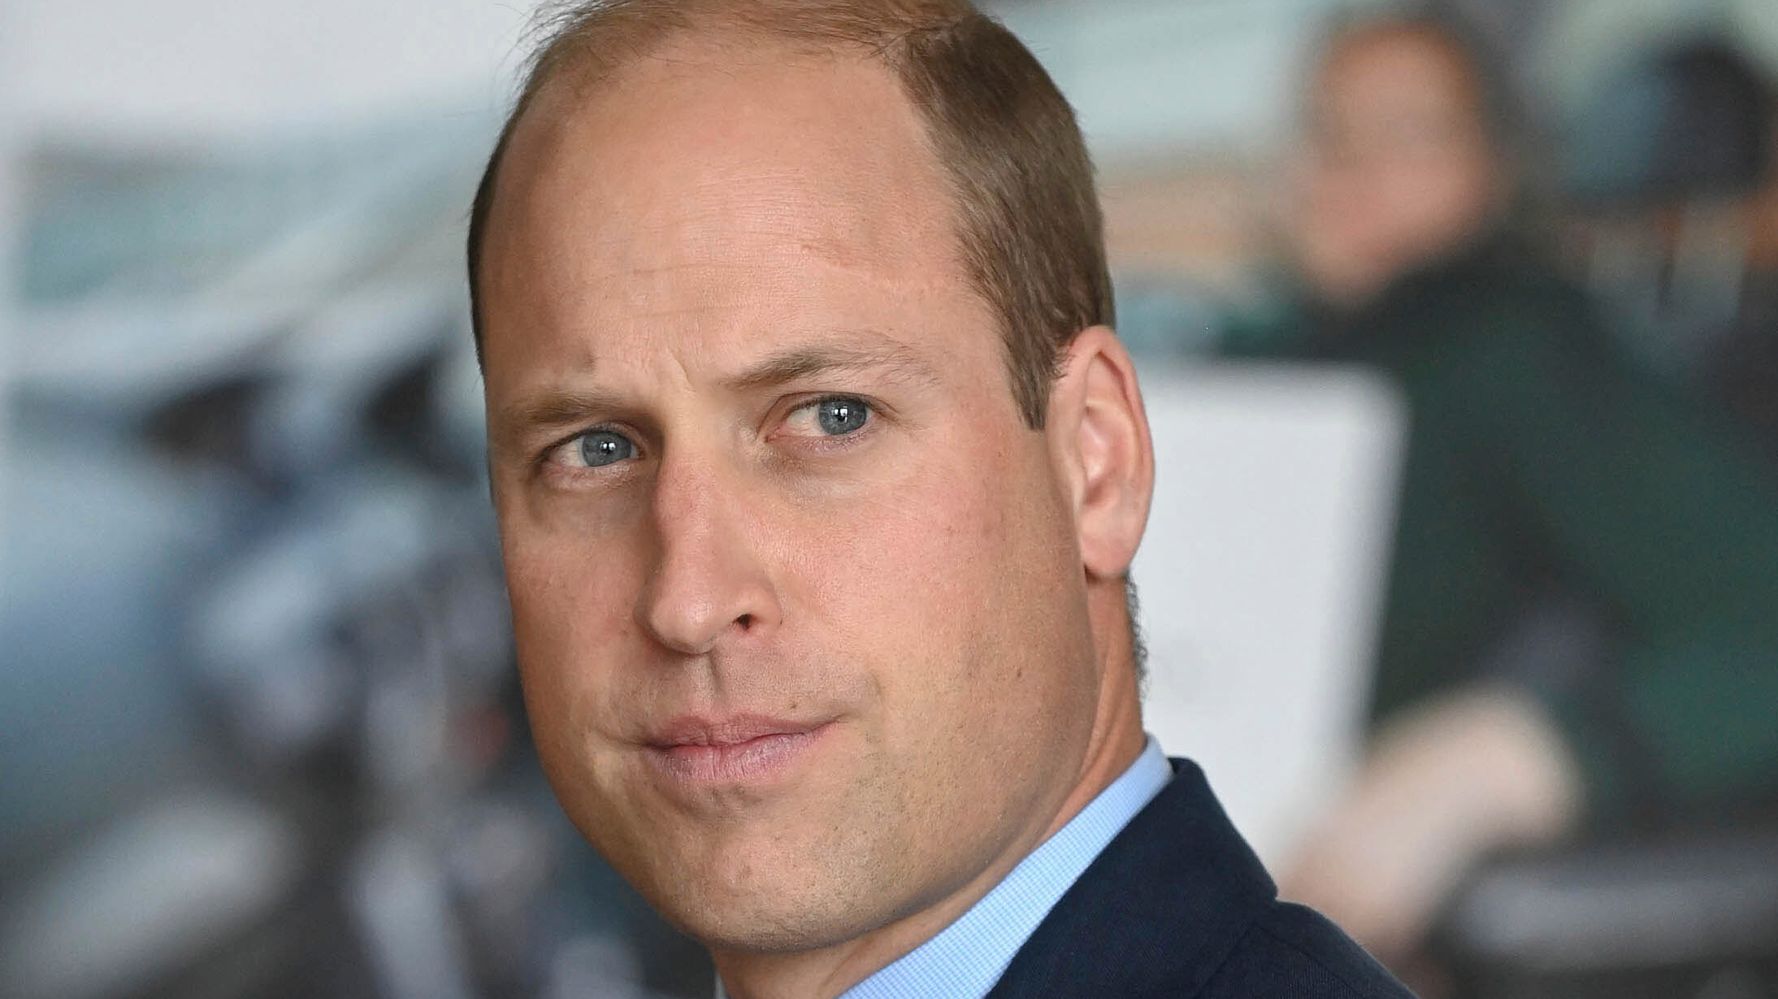 Prince William Contracted COVID-19 In April: Verslae